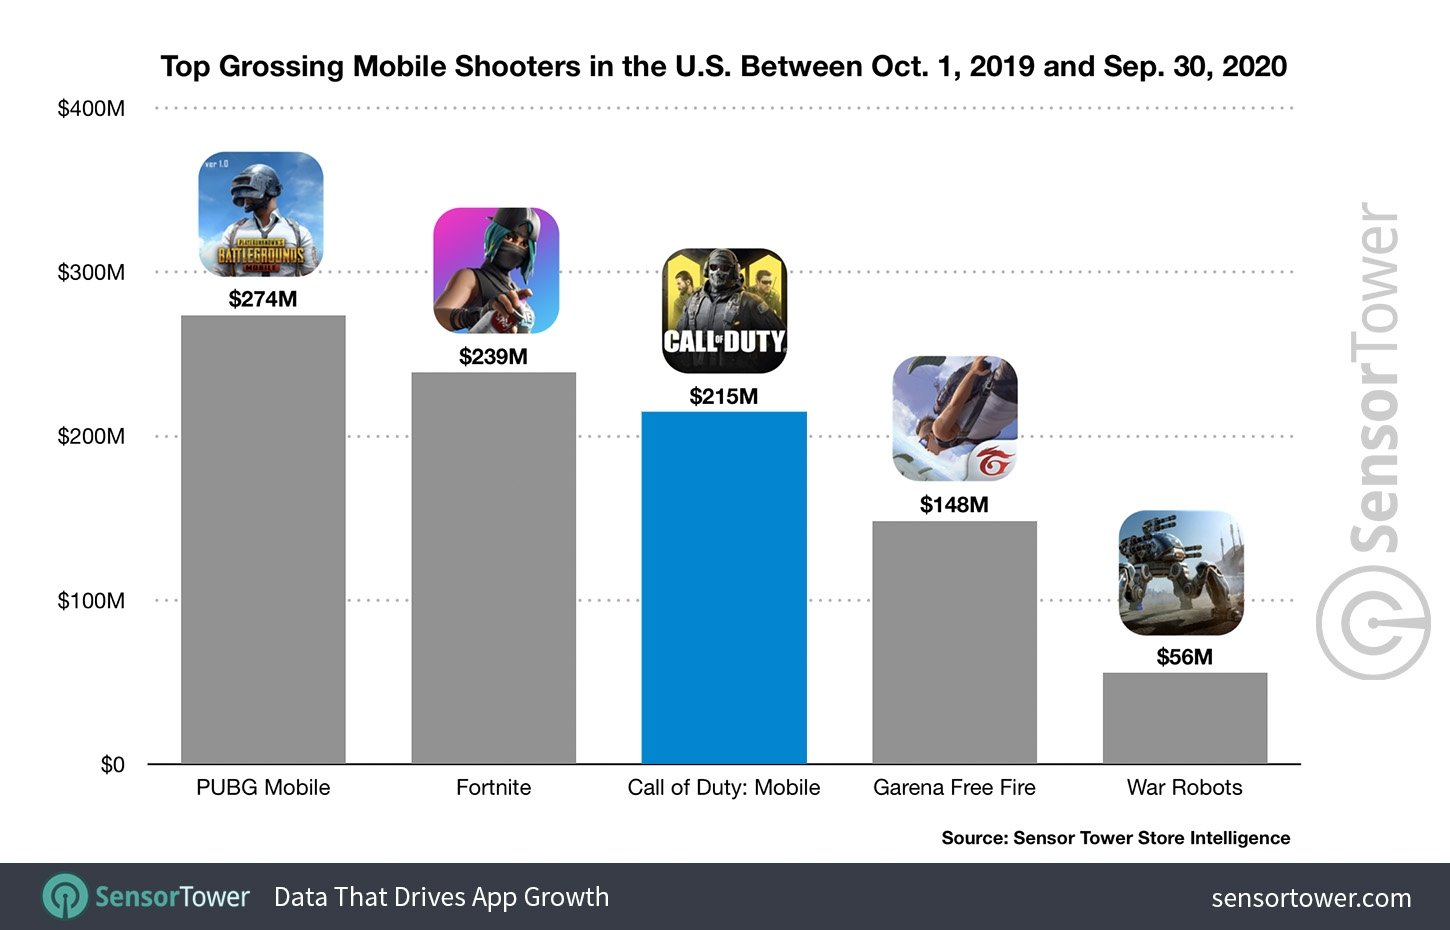 Call of Duty: Mobile is a first-day hit, downloaded 20 million